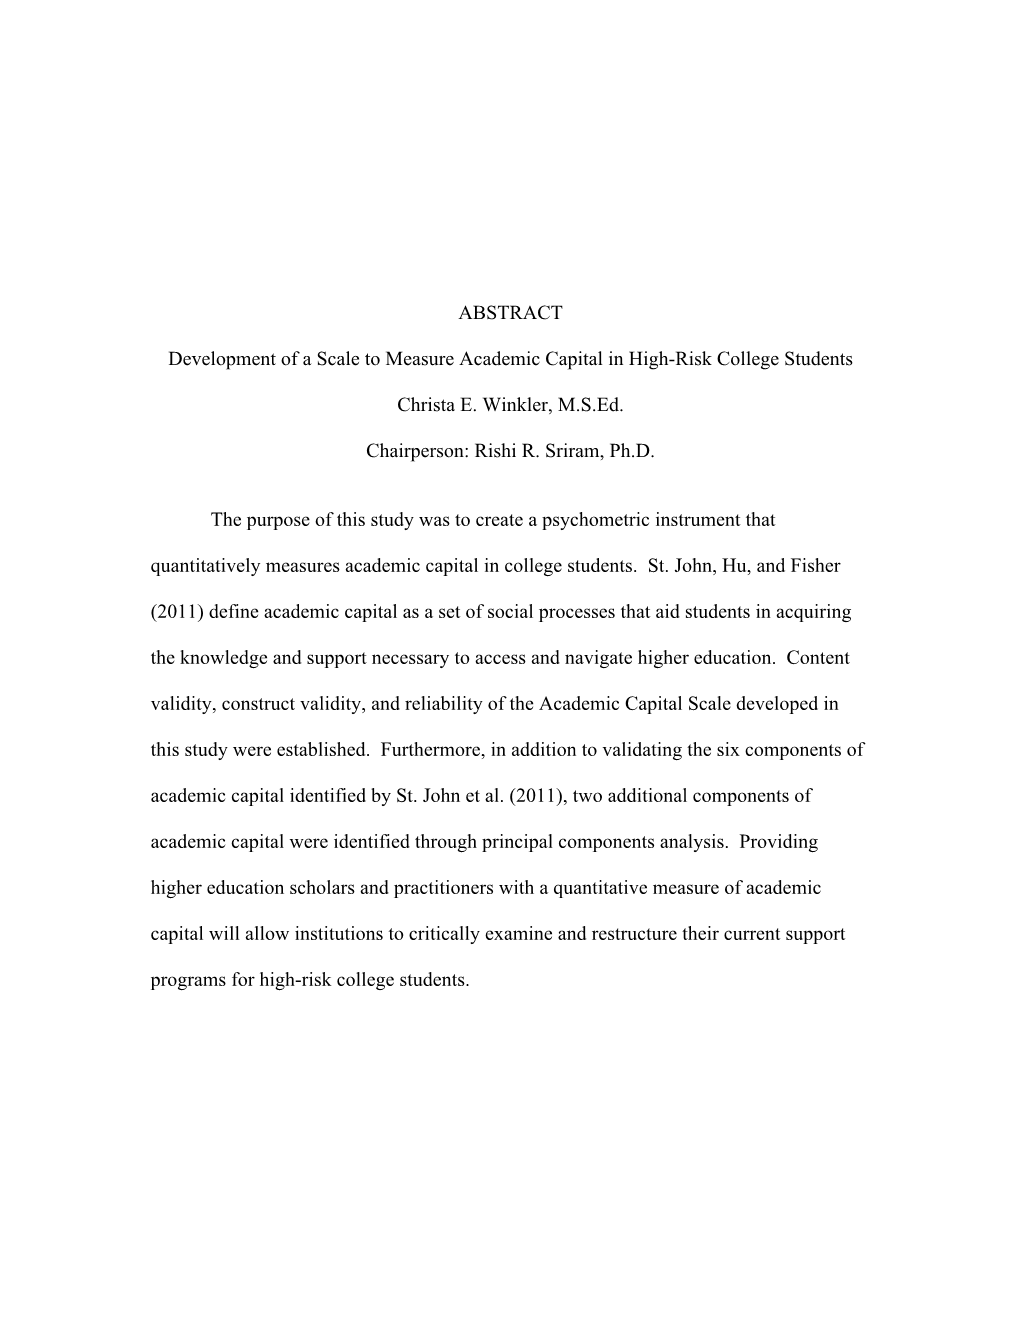 ABSTRACT Development of a Scale to Measure Academic Capital In